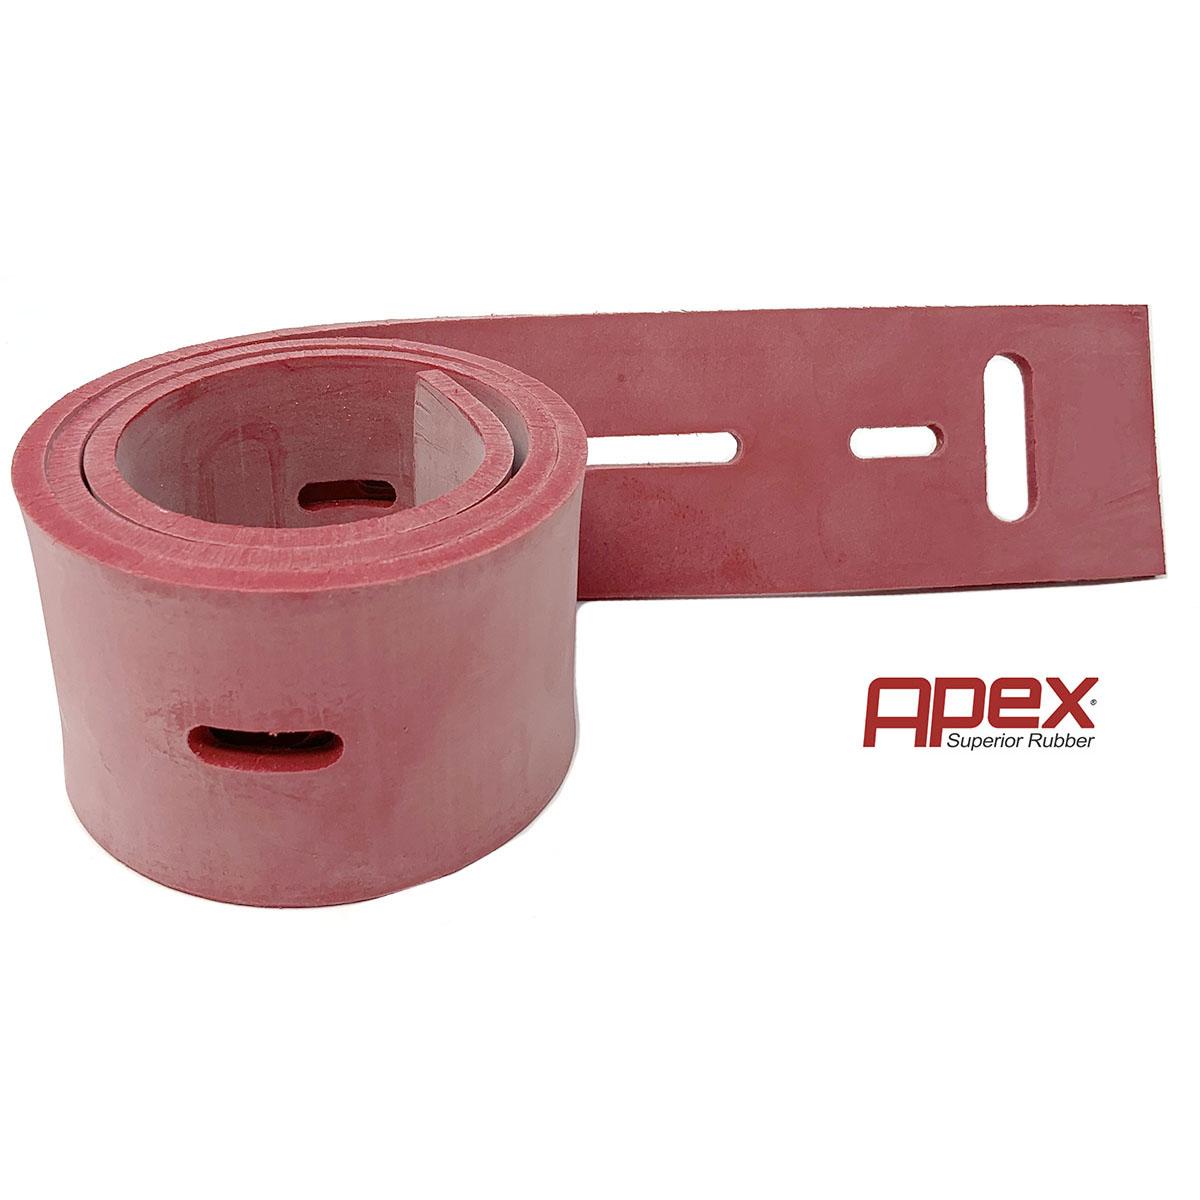 Squeegee Rear .125In Apex, Fits Viper Vf90125